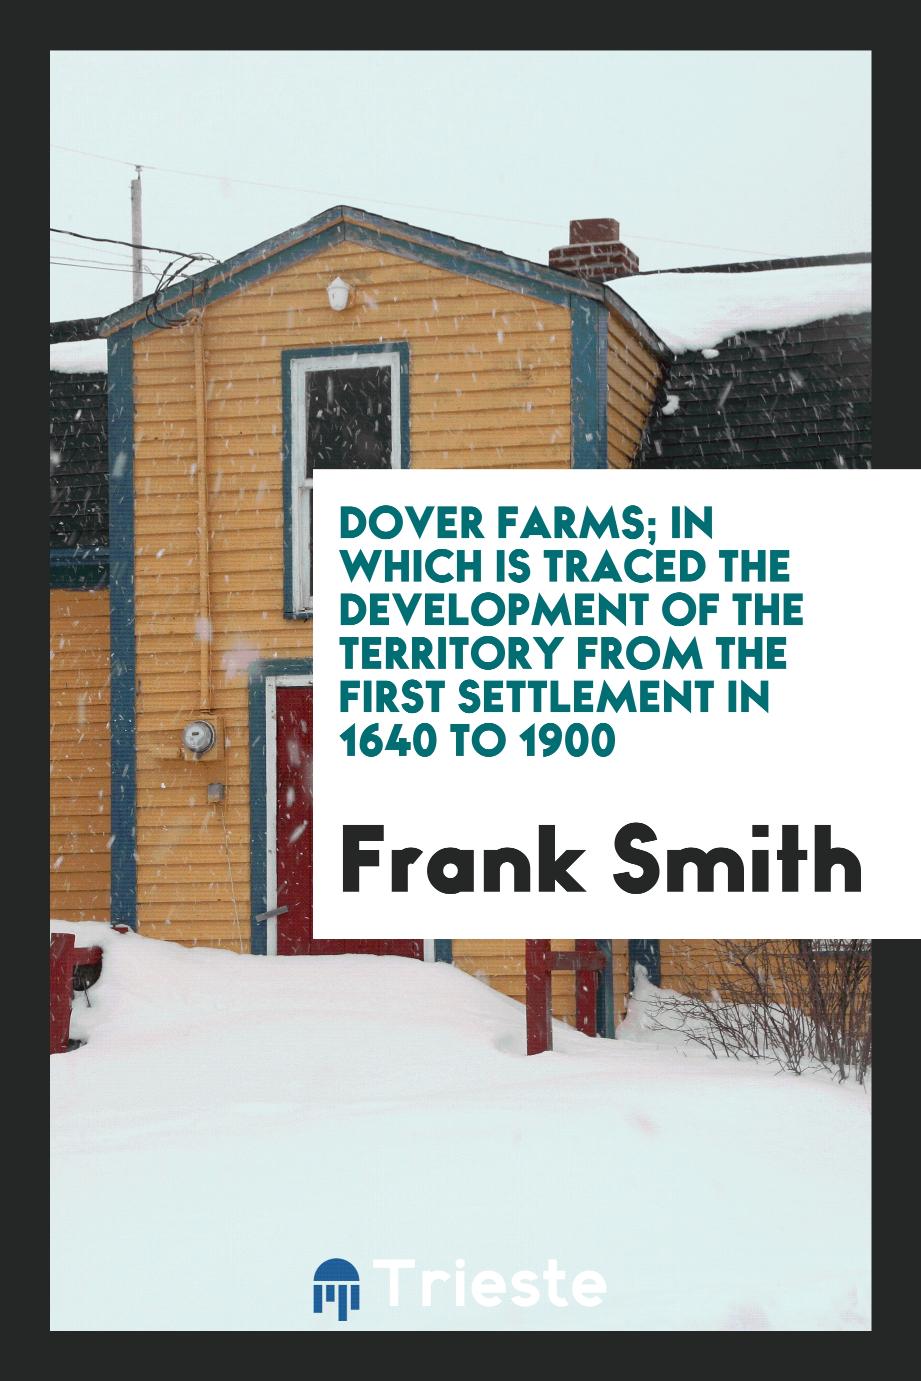 Dover farms; in which is traced the development of the territory from the first settlement in 1640 to 1900